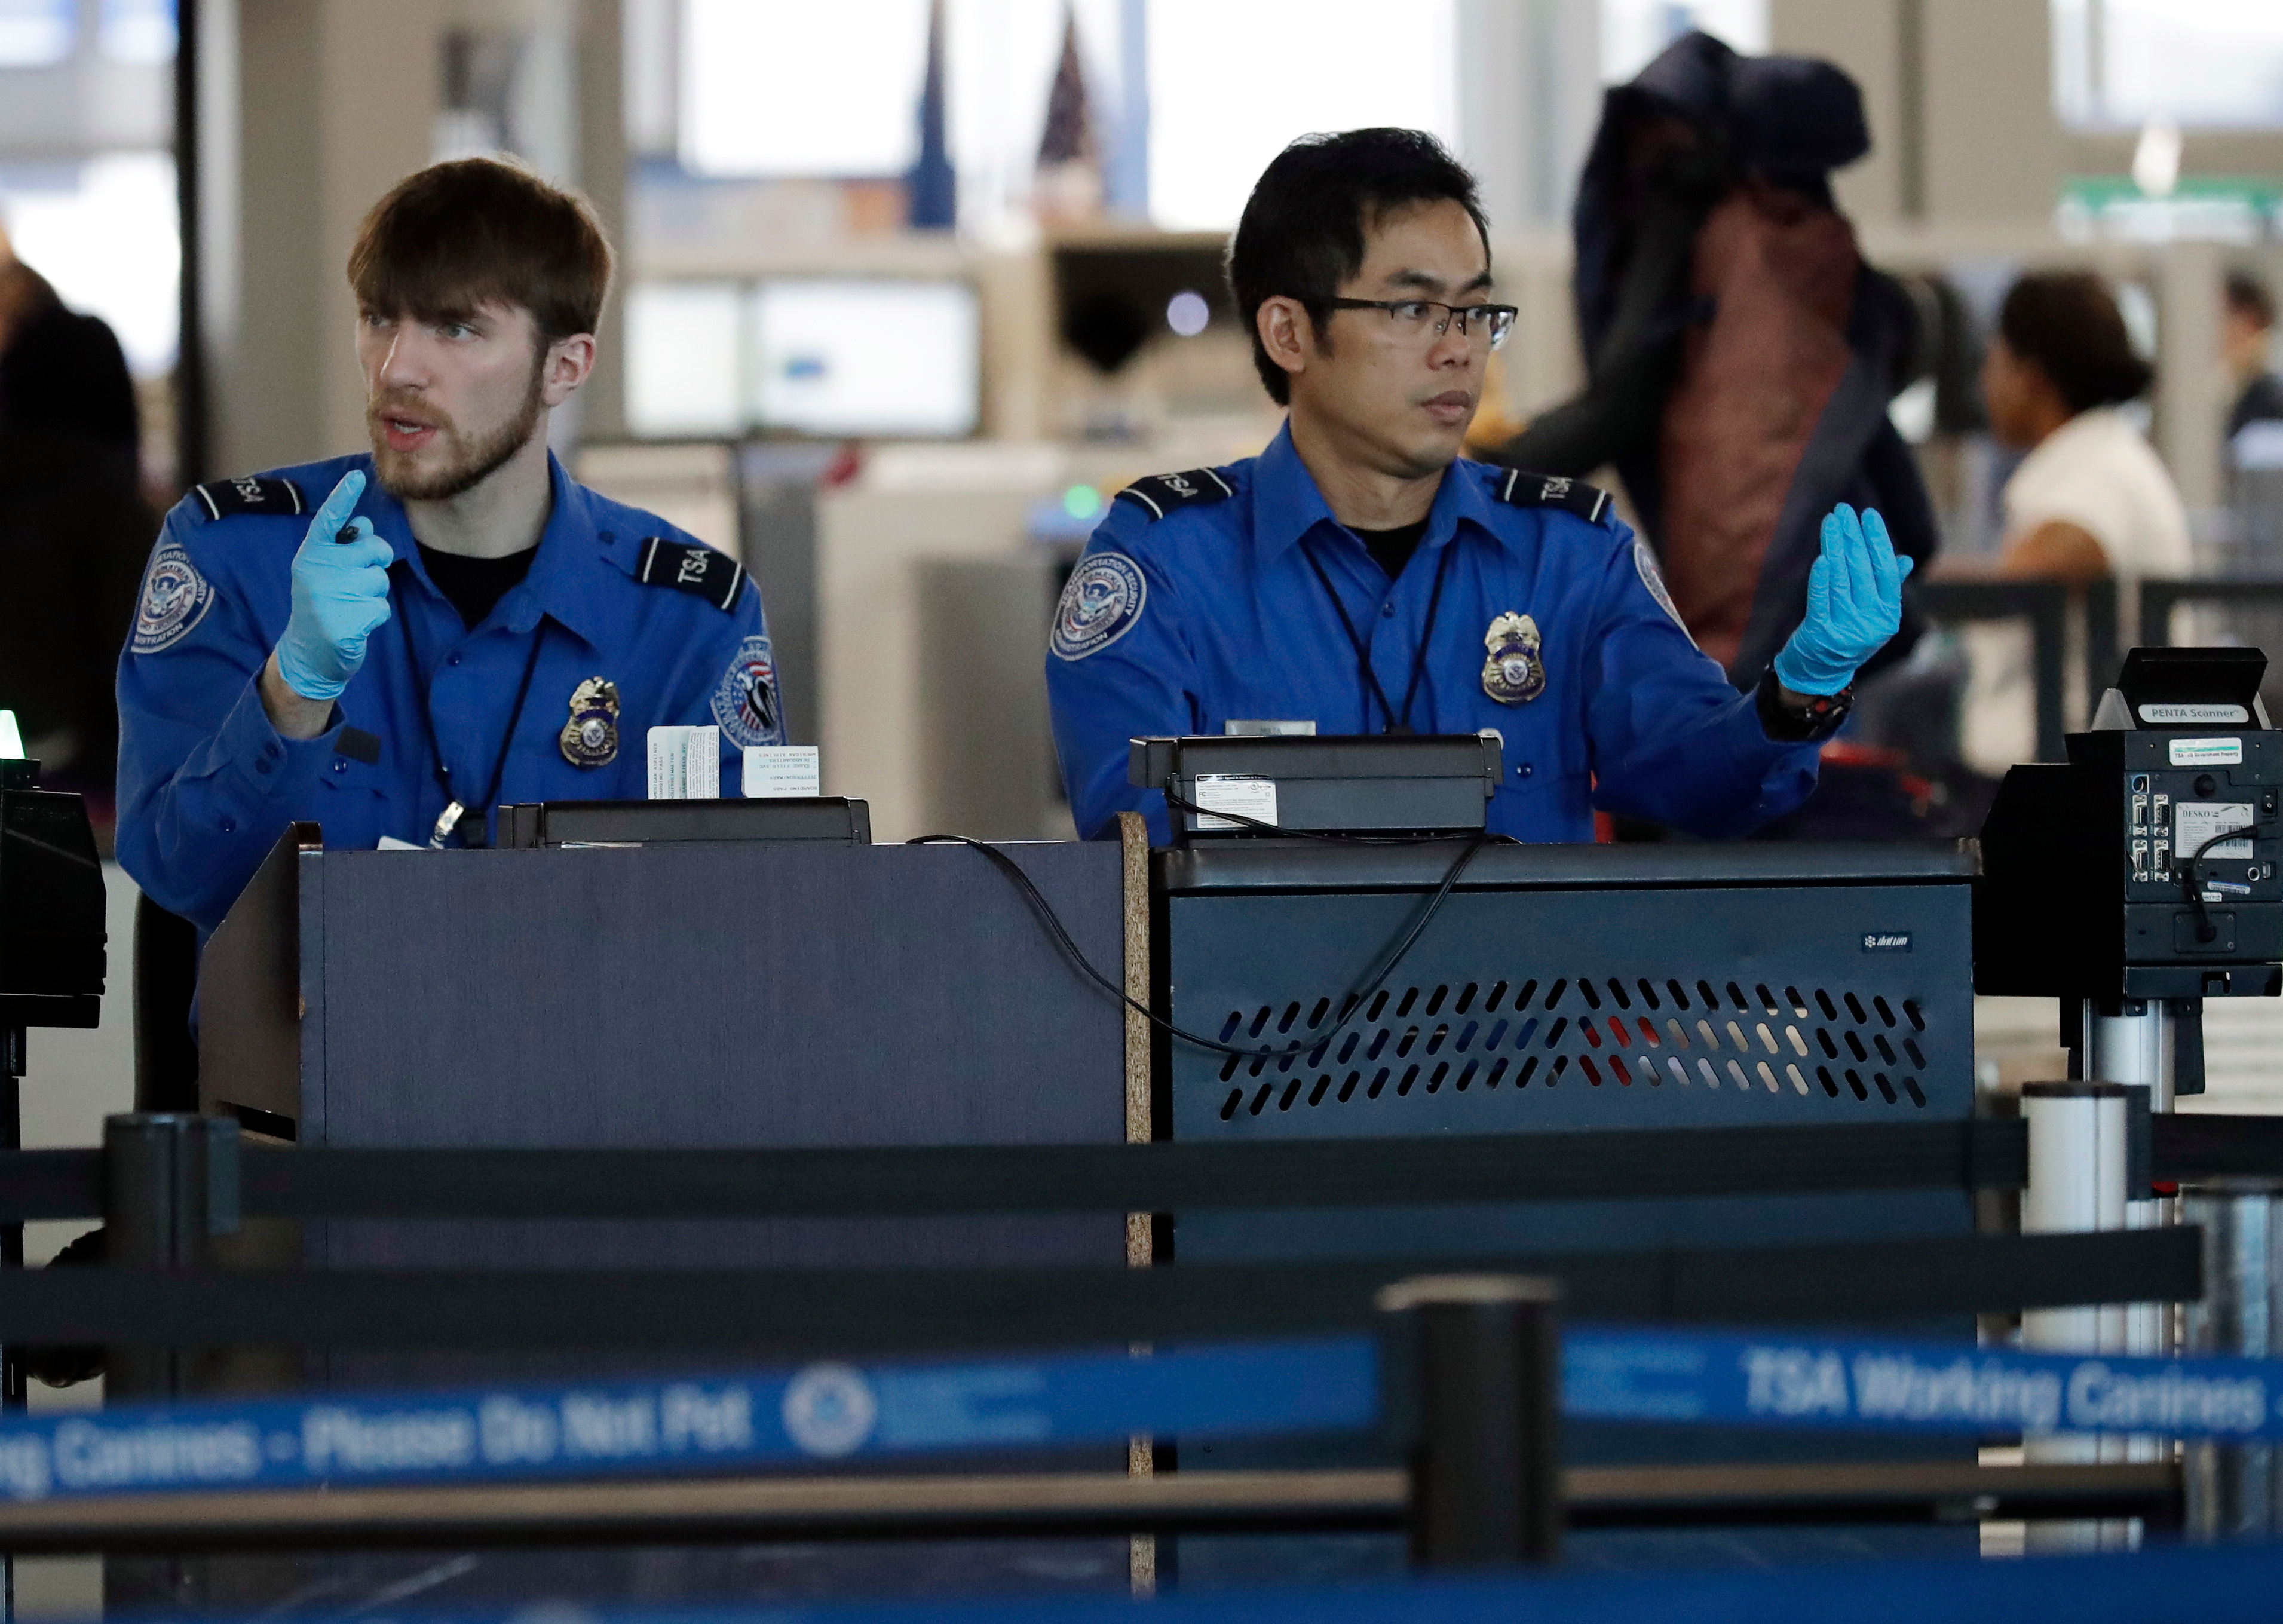 Transportation Security Administration officers work at a checkpoint at O'Hare airport in Chicago, Il. on Jan. 5, 2019. (Nam Y Huh—AP/REX/Shutterstock)